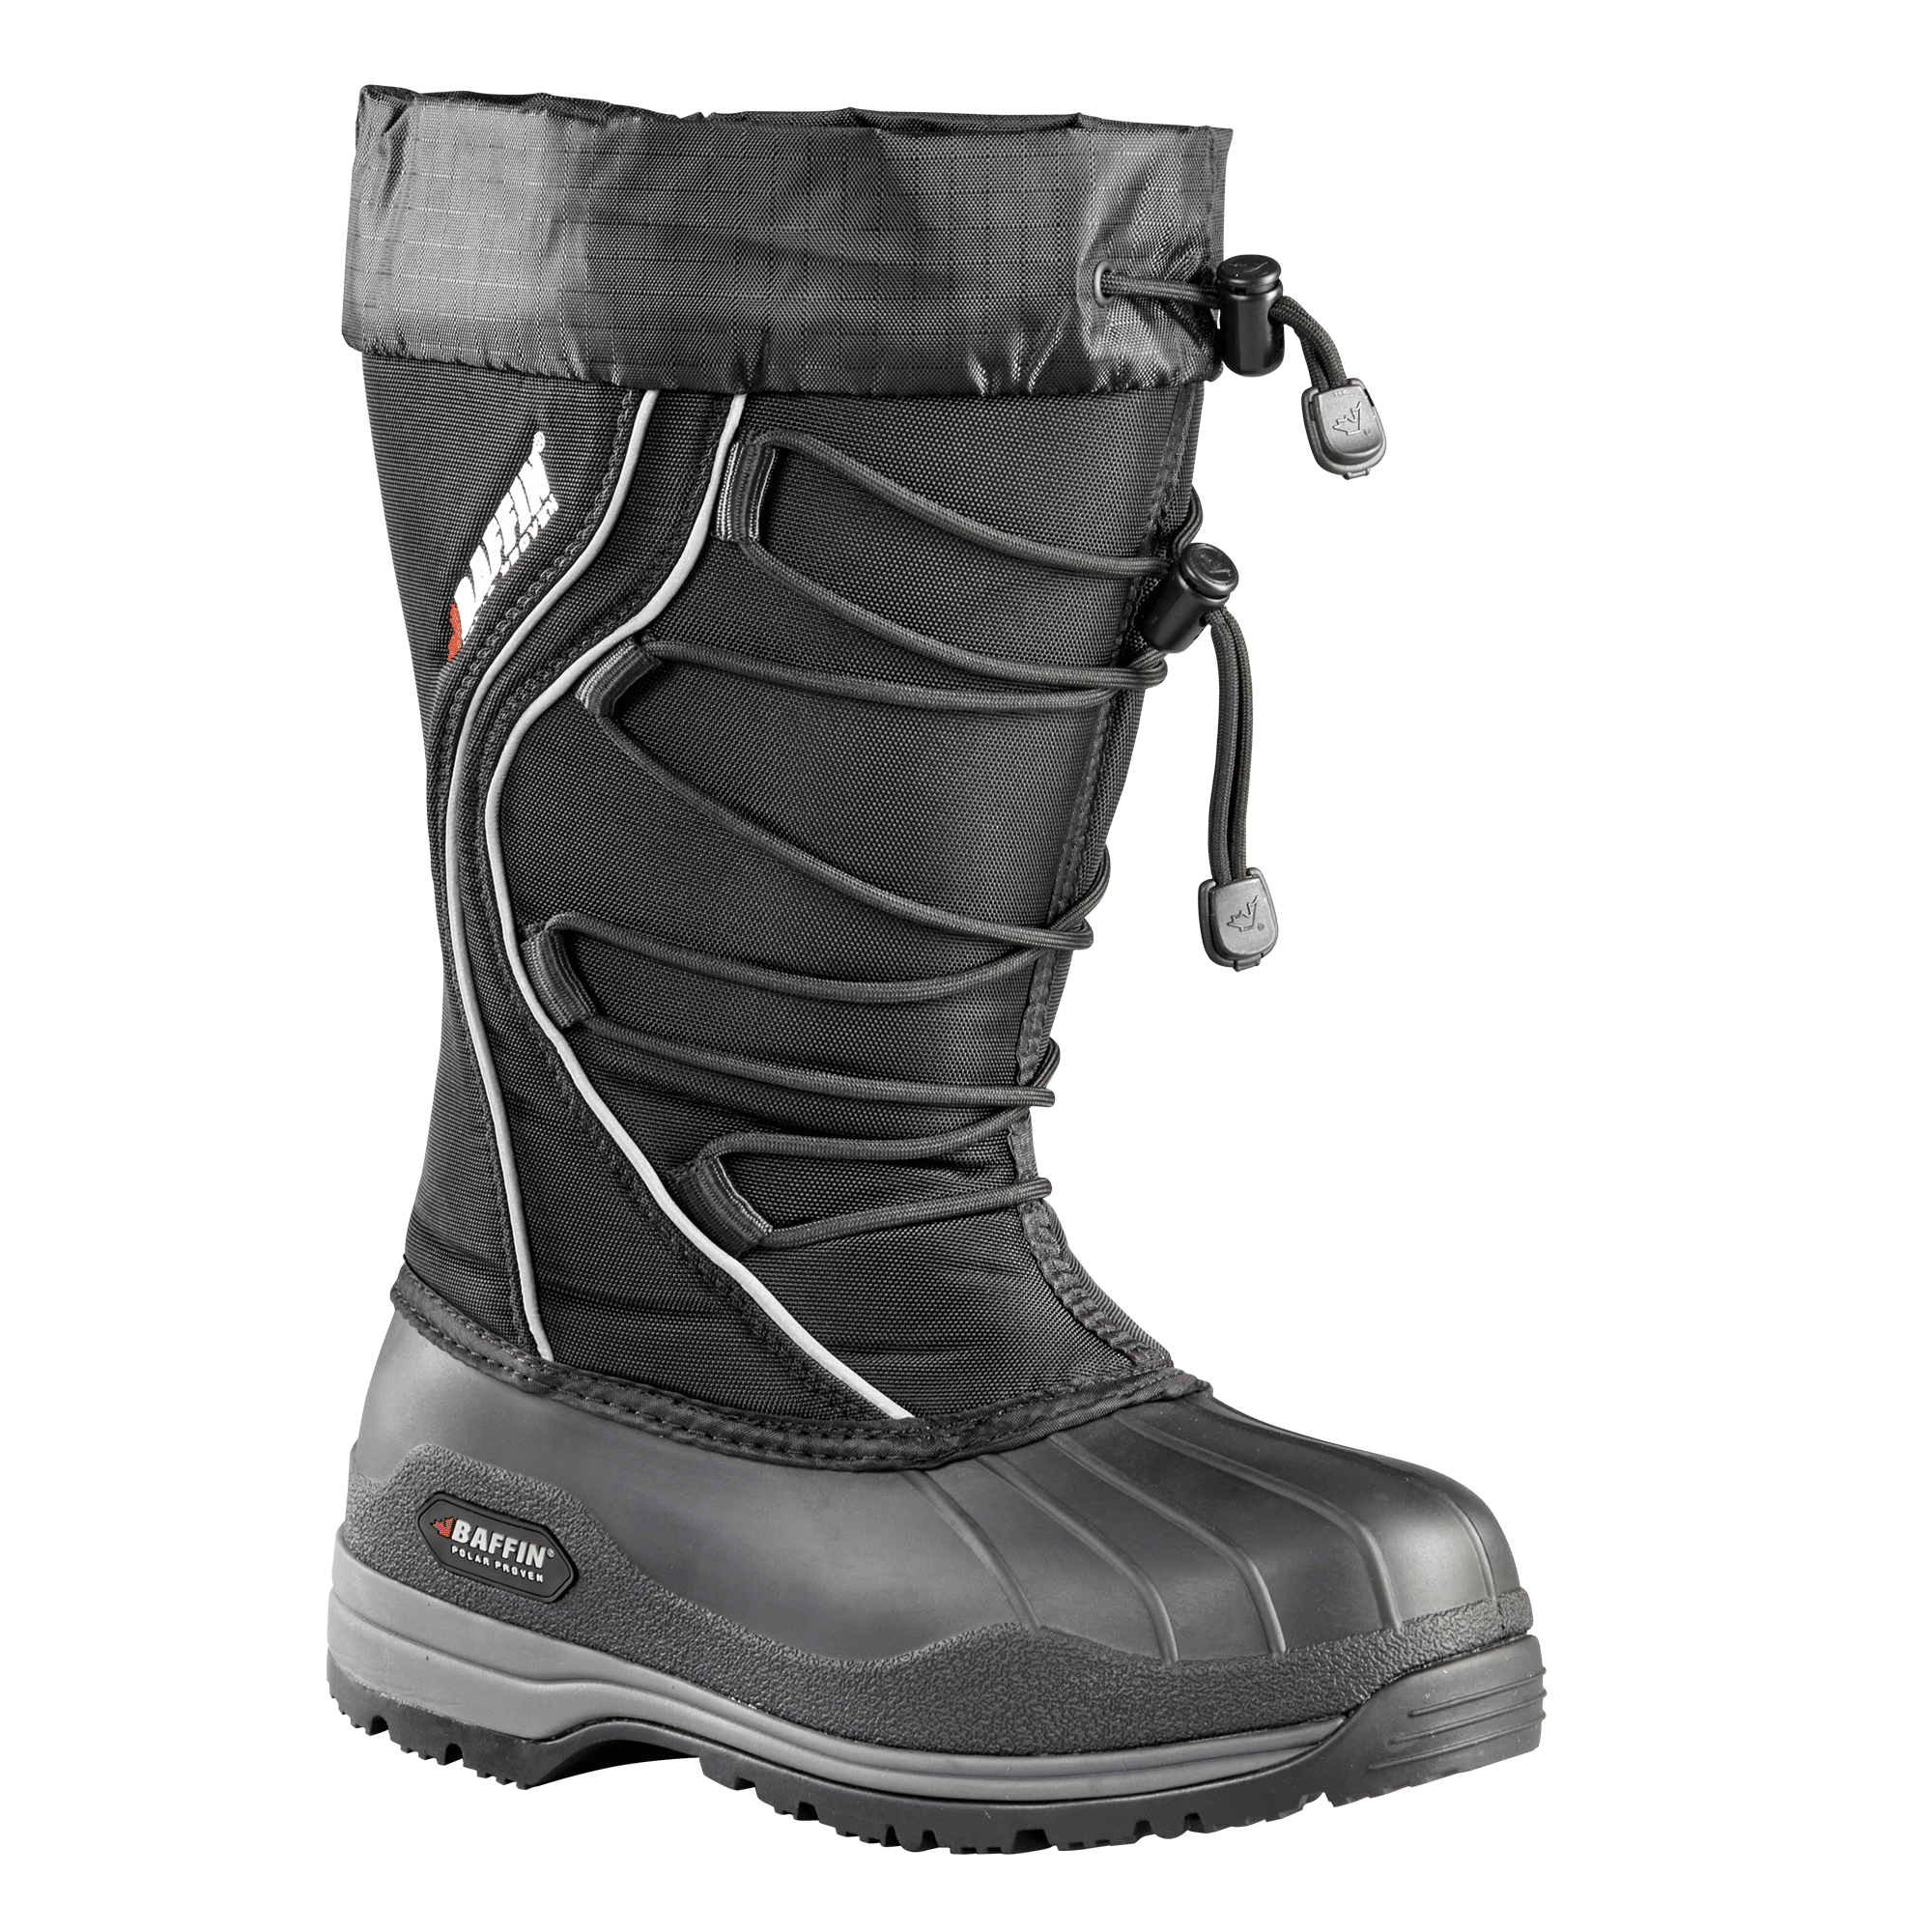 Baffin Women's Ice Field Insulated Boots, Black, 8